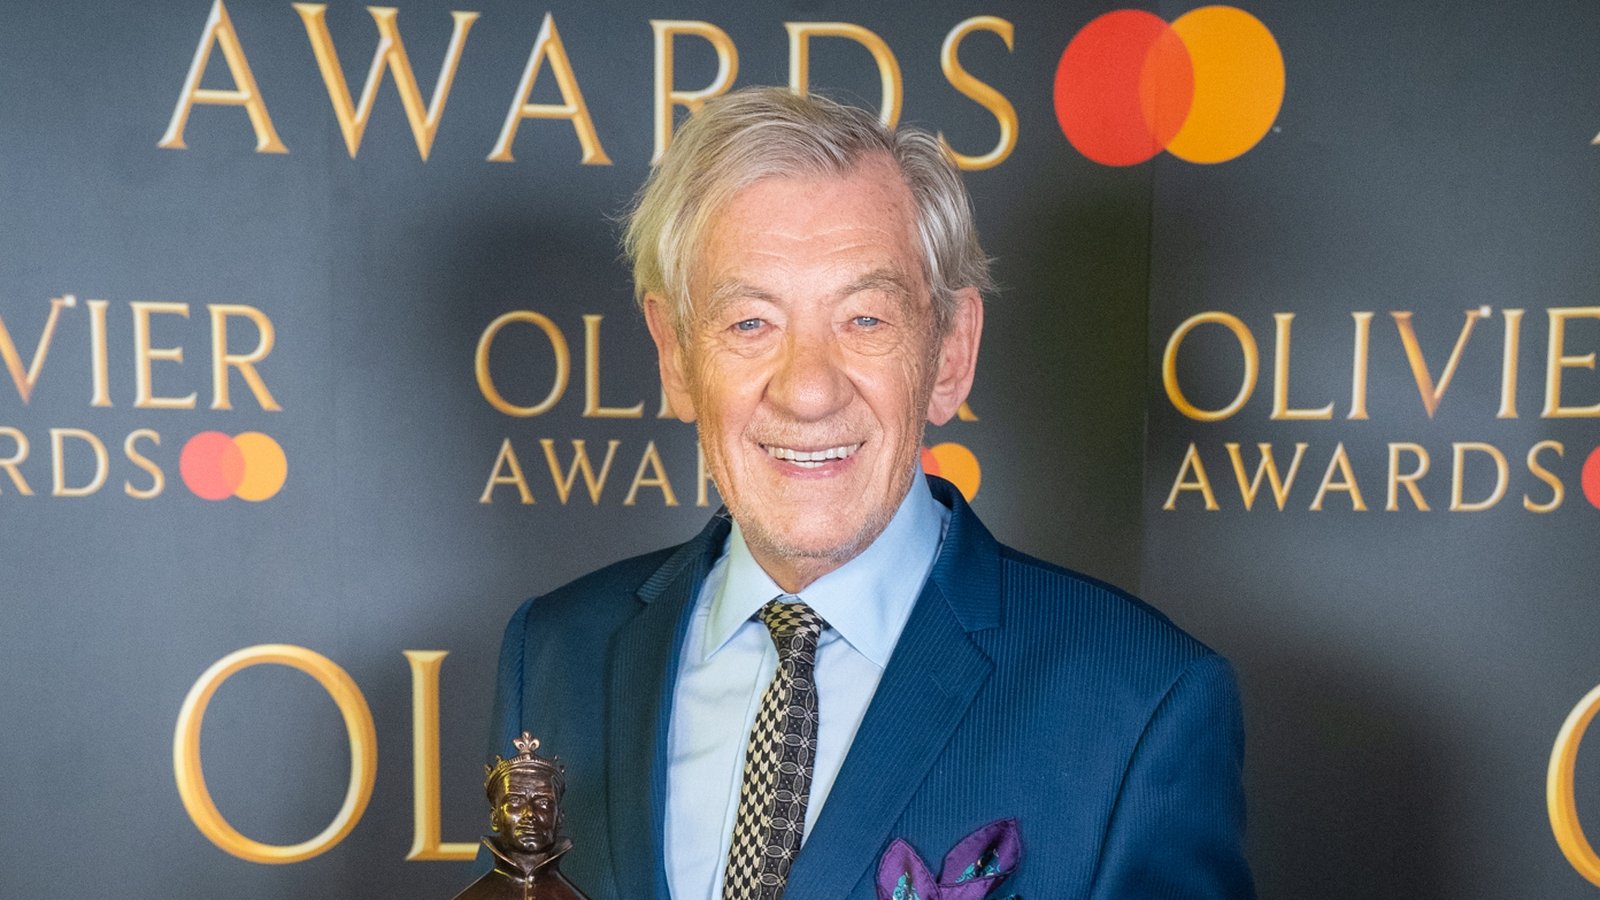 Ian Mckellen Says Coming Out Helped His Work 